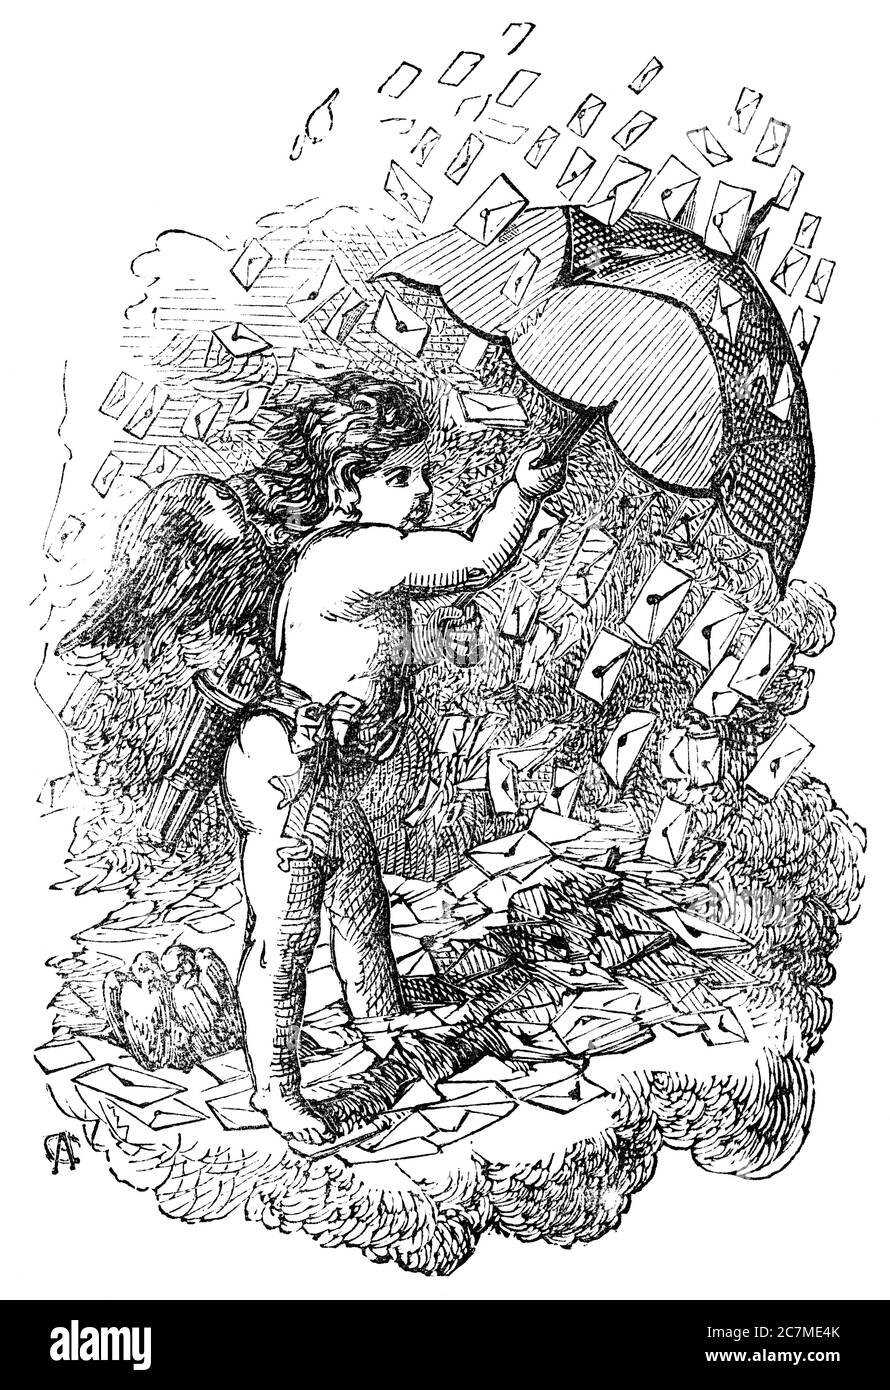 An engraved vintage illustration romance love image of the cherub Eros holding an umbrella as it's raining St Valentine's day cards from a Victorian b Stock Photo